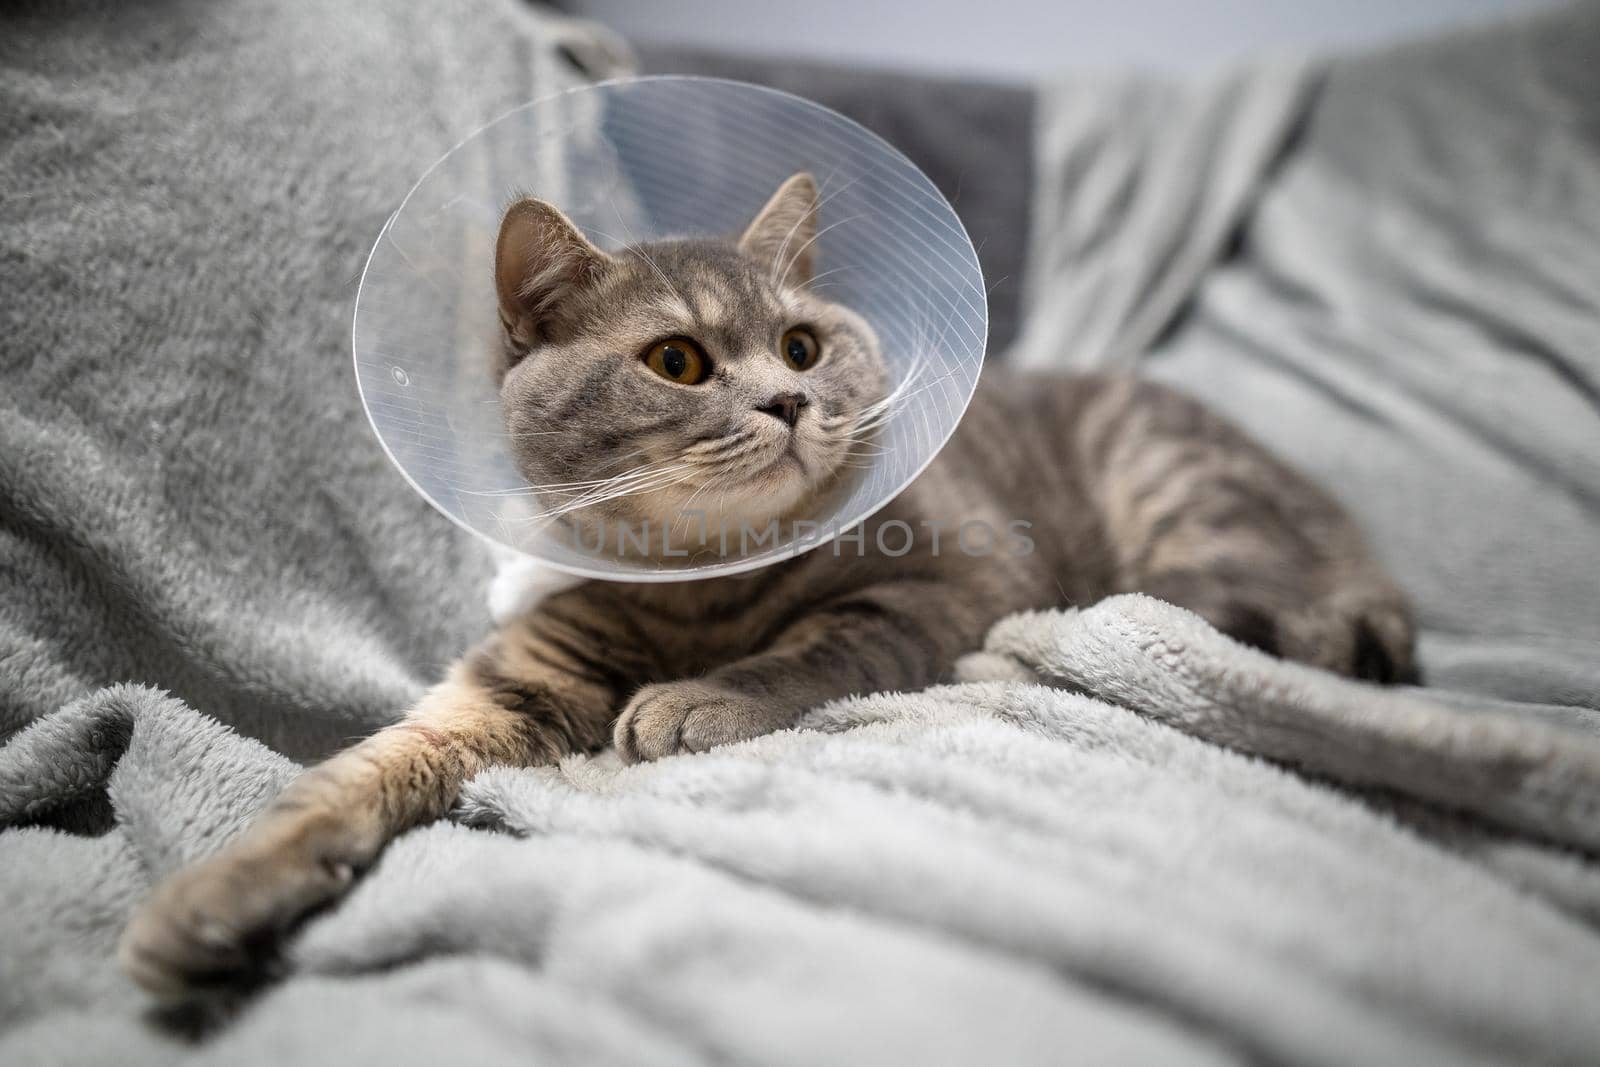 Tired cat gray Scottish Straight breed resting with veterinairy cone after surgery at home on the couch. Animal healthcare concept. After surgery cat's recovery in or E-Collar. Elizabethan Collar.